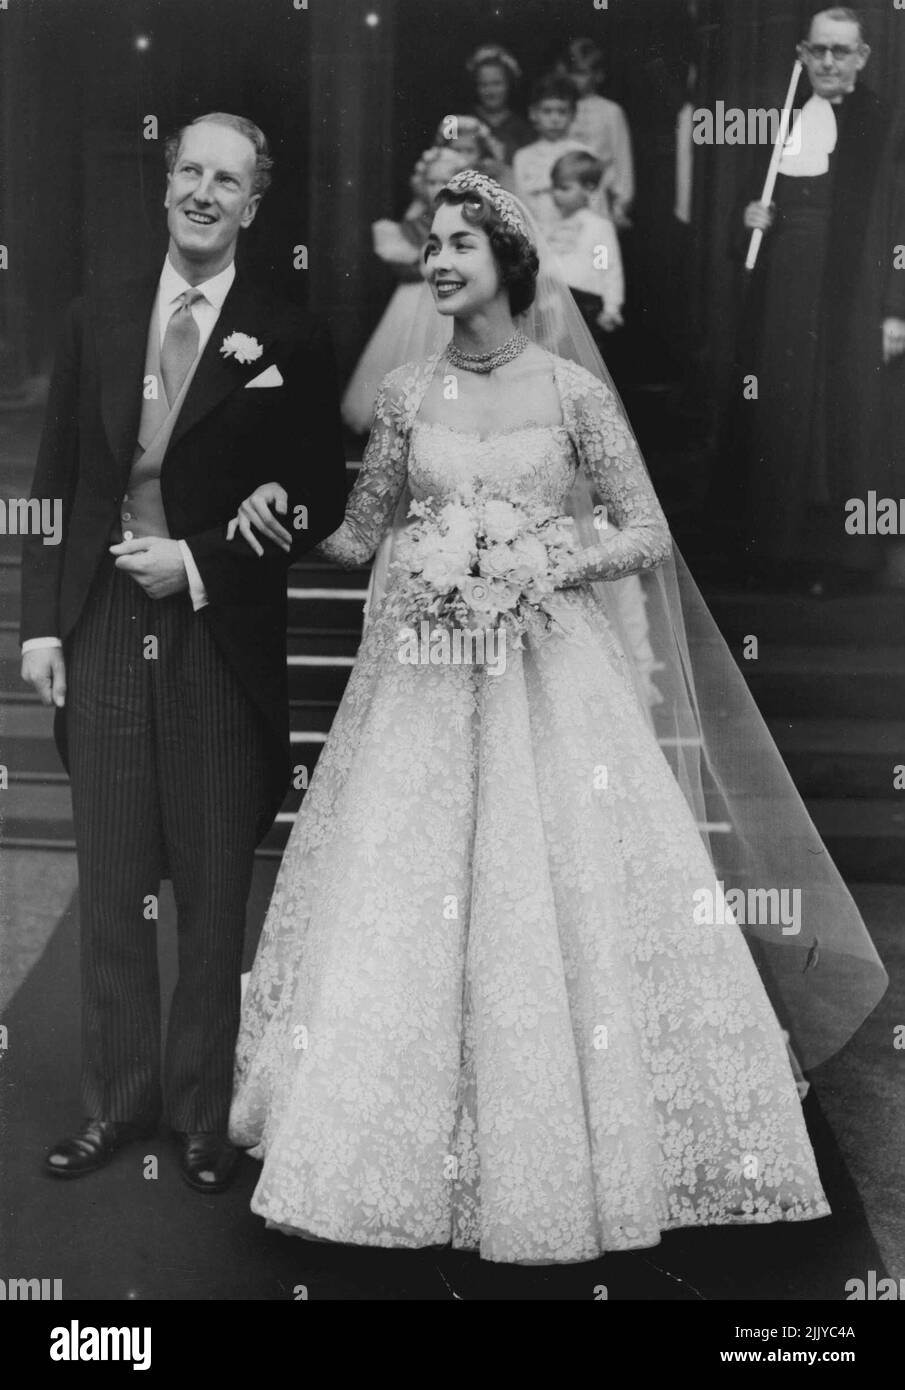 The Earl and his Bride:- The Earl of Dalkeith, 29, and his radiant bride, 22 - year - old Miss Jane McNeill, a former mannequin and daughter of Mr.John McNeill, Queen's Counsel, leave St.Giles' Cathedral after their wedding. The Queen, Duke of Edinburgh, Princess Margaret, and other members of the royal family were among the guests. The Earl is heir to the eight - county estates of the Duke of Buccleuch. The Dukedom dates back to 1663. January 11, 1953. Stock Photo